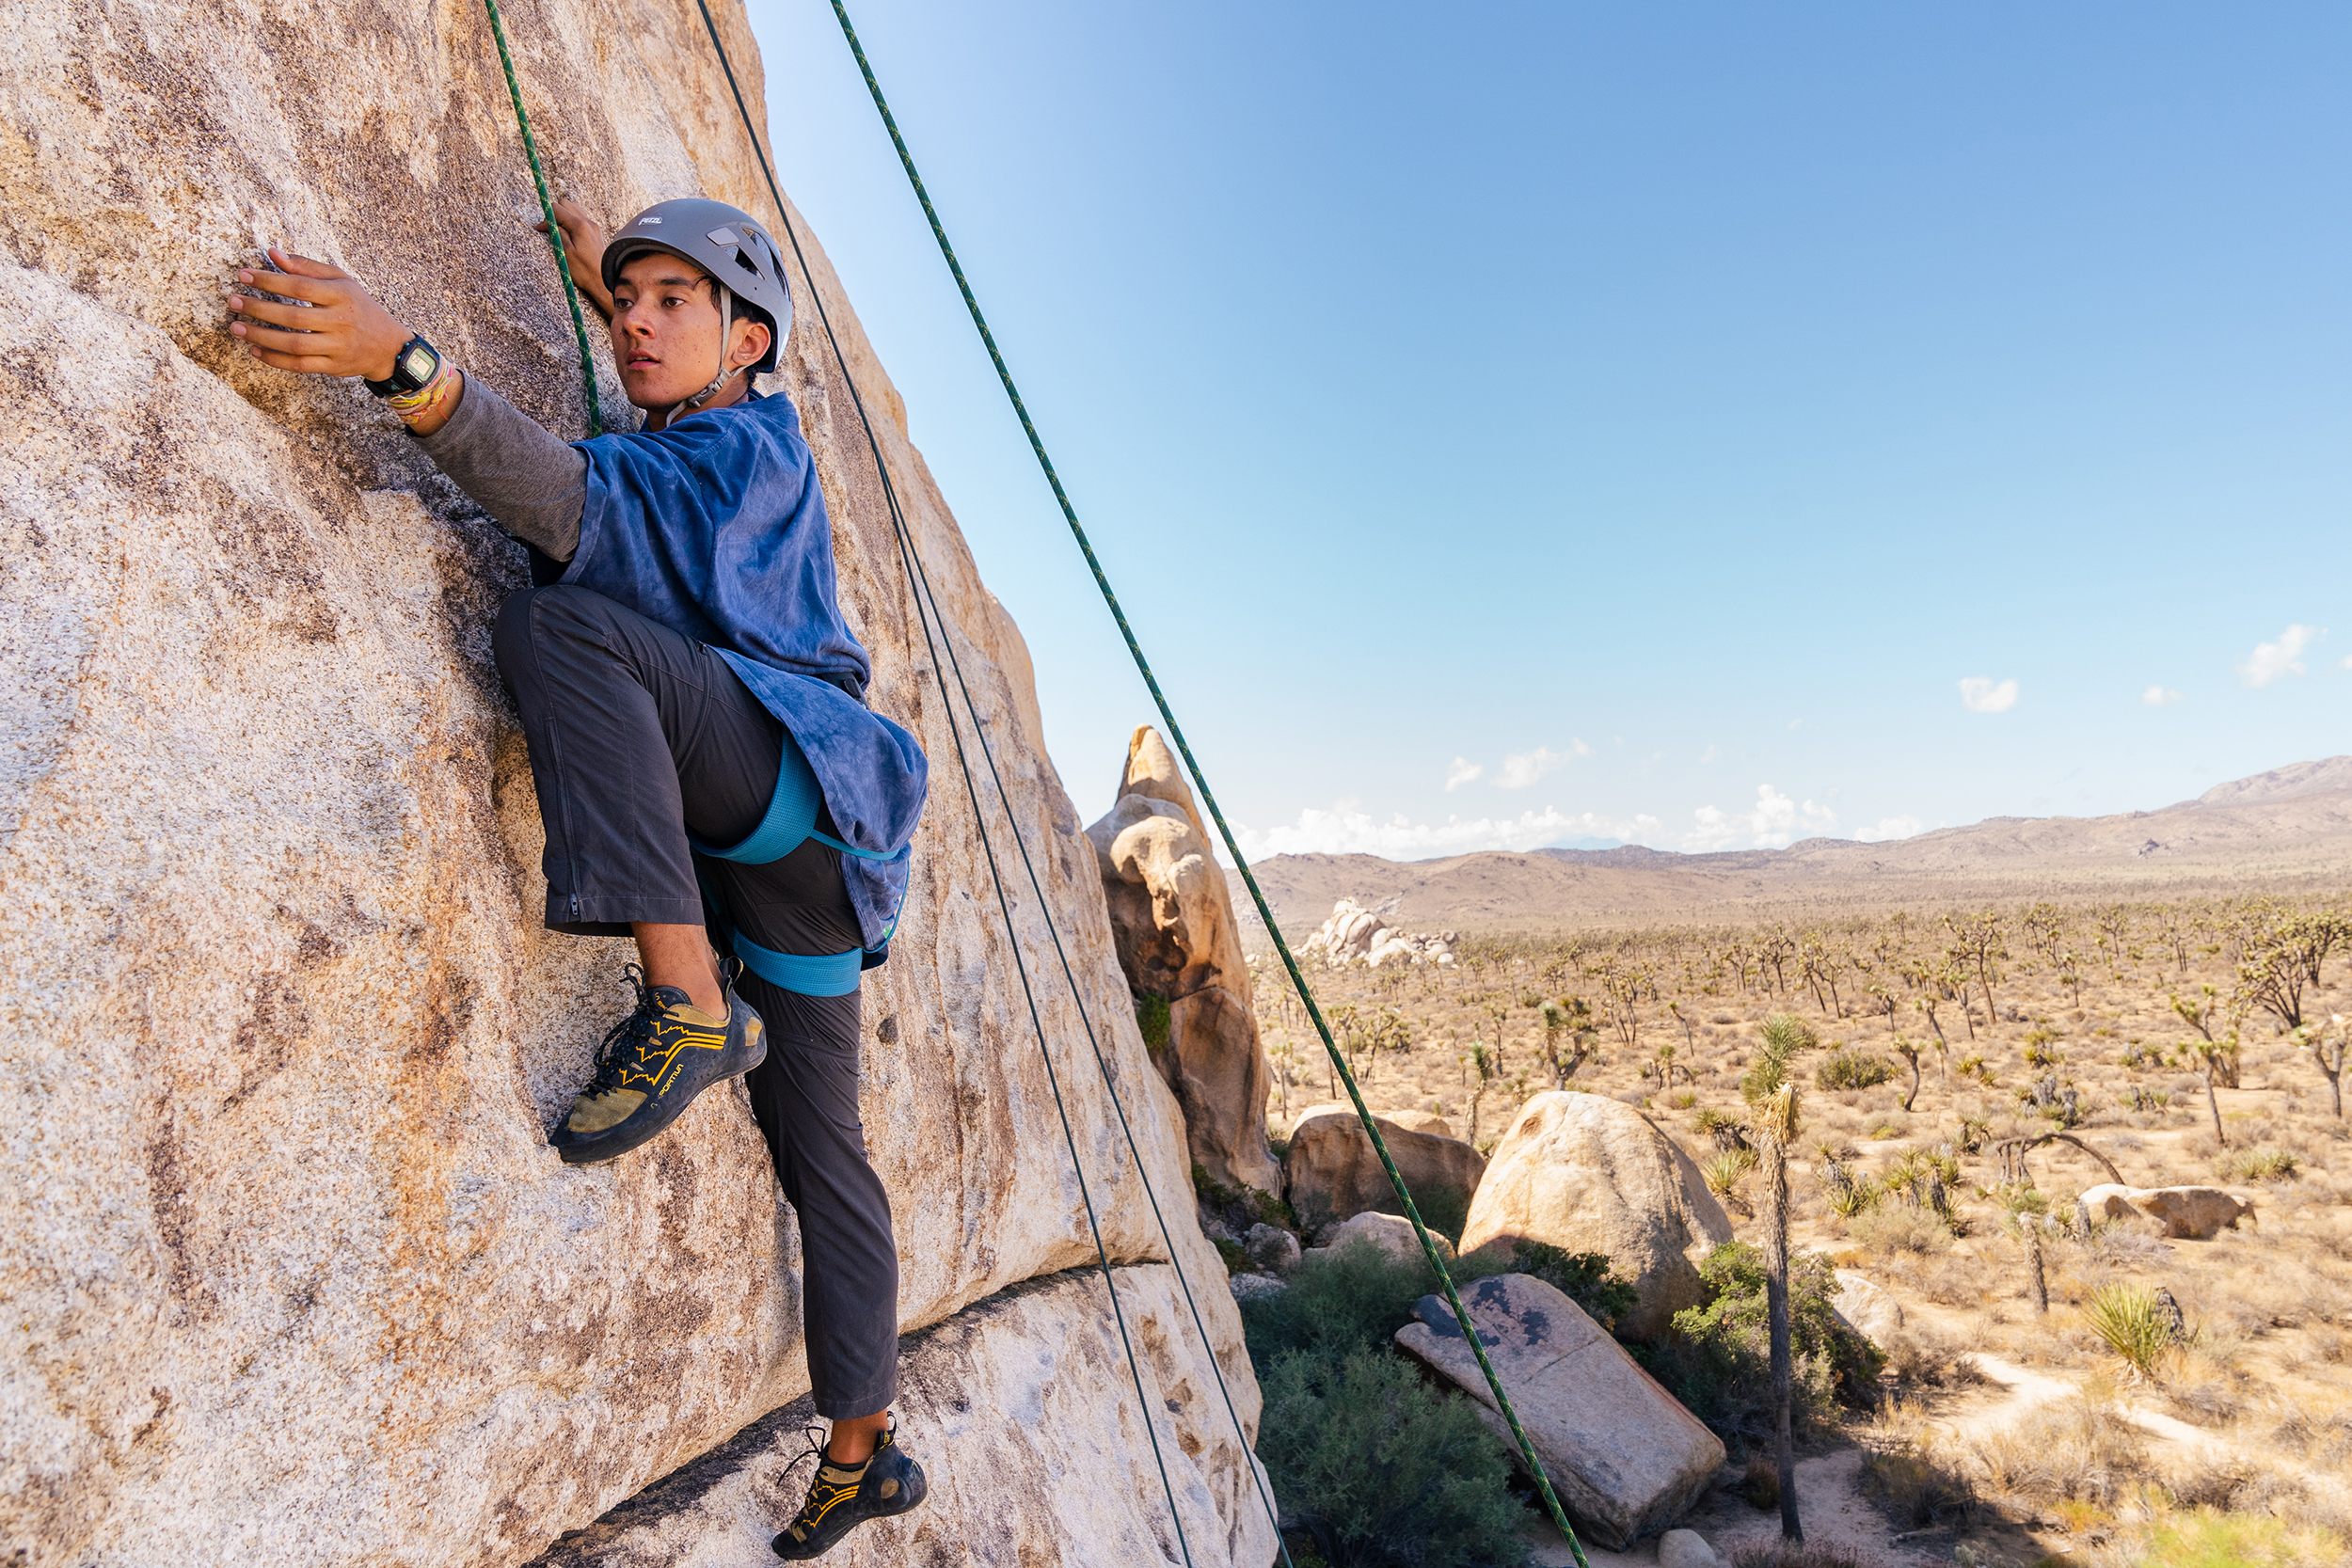 A rock climber wears a helmet and is hooked onto ropes while he scales a boulder in Joshua Tree National Park